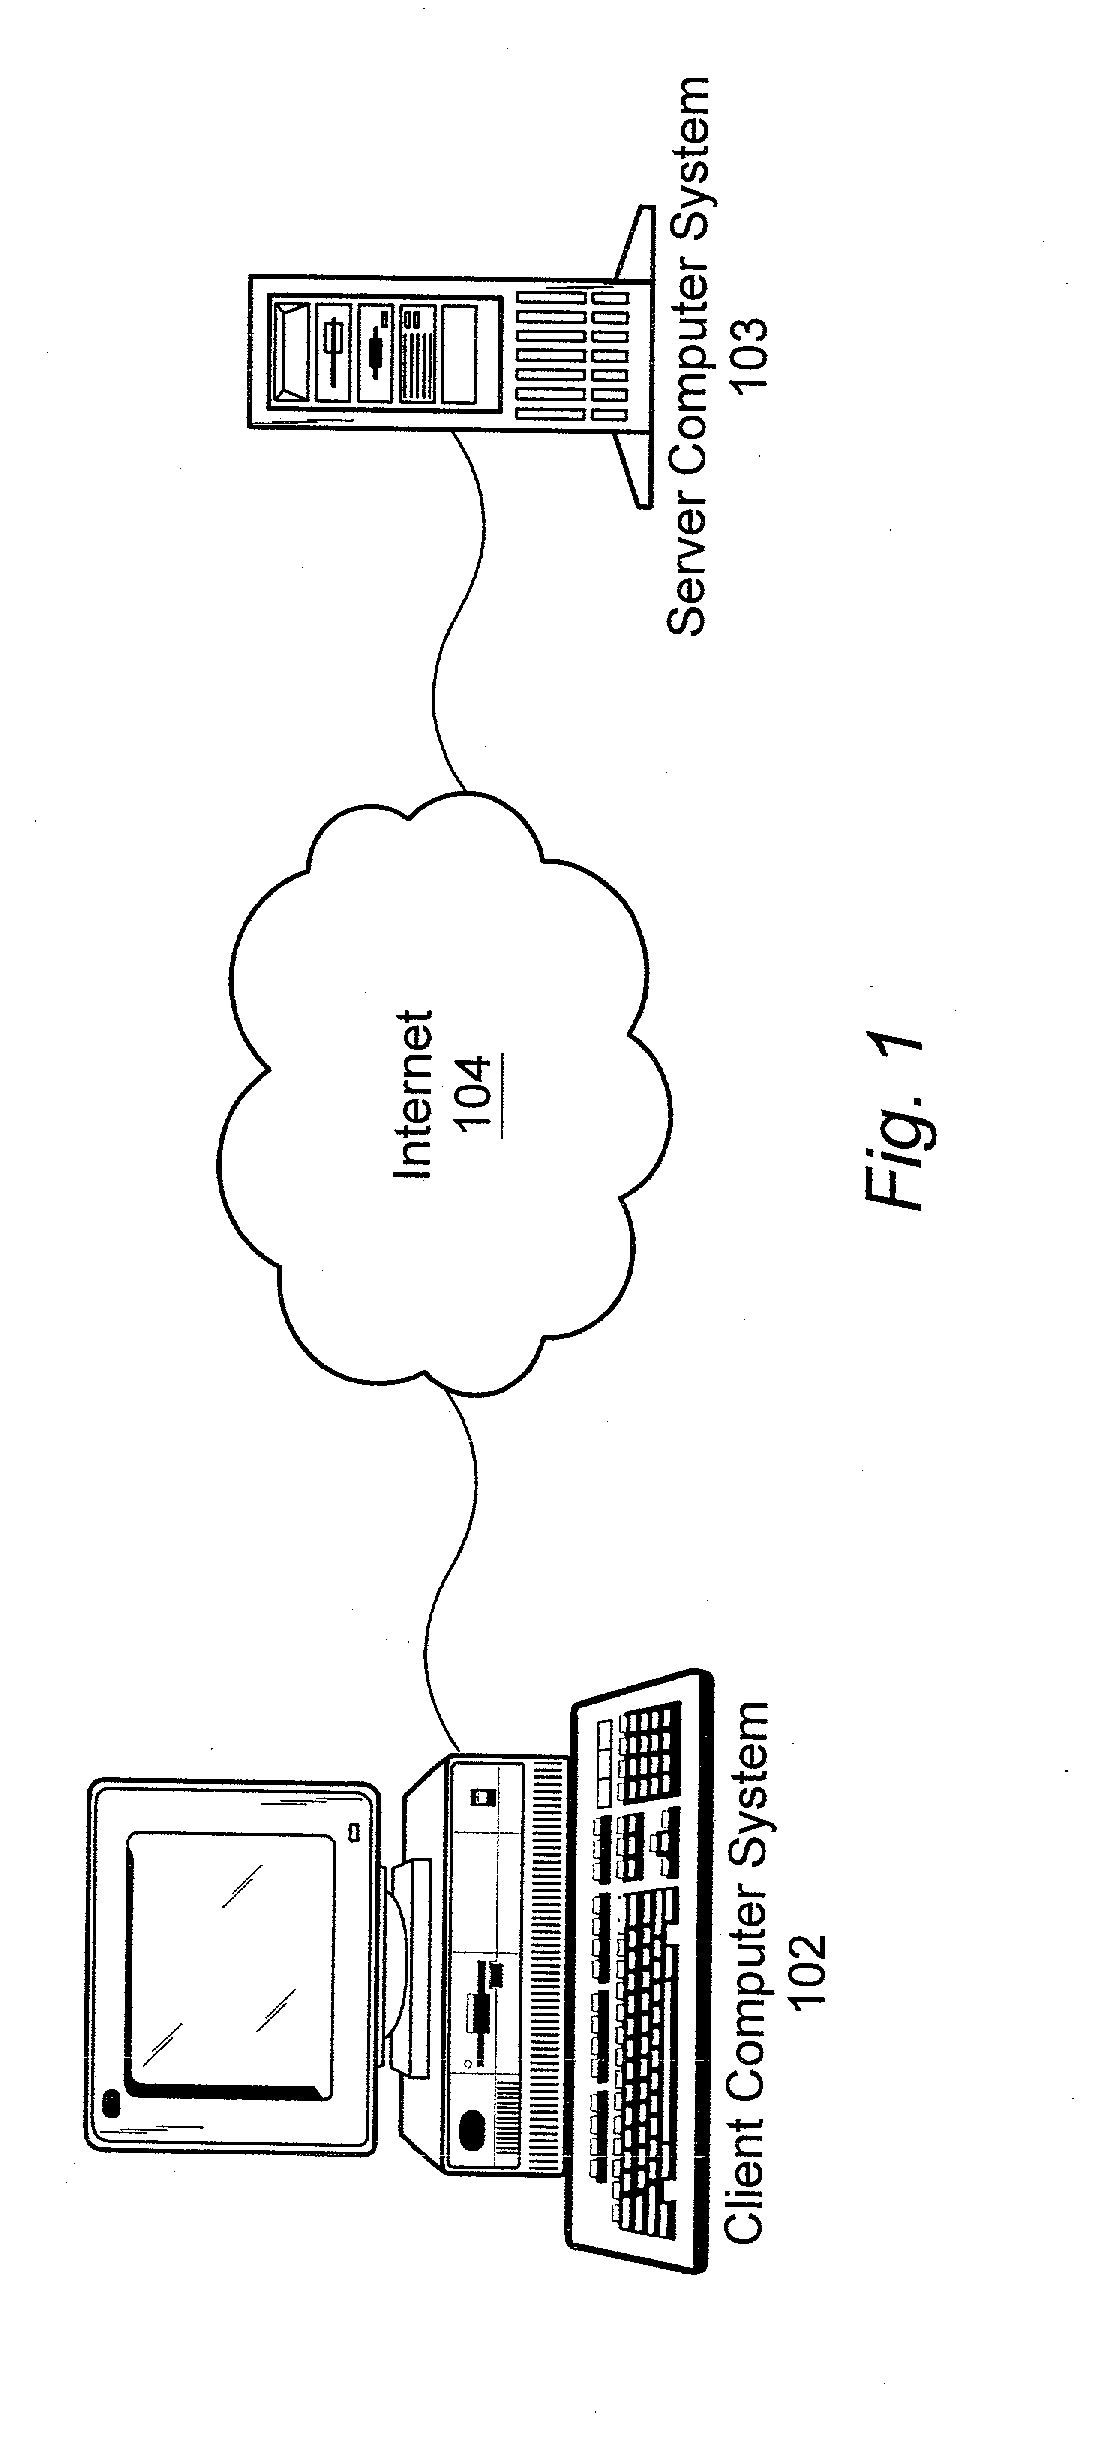 System and method for online specification of measurement hardware